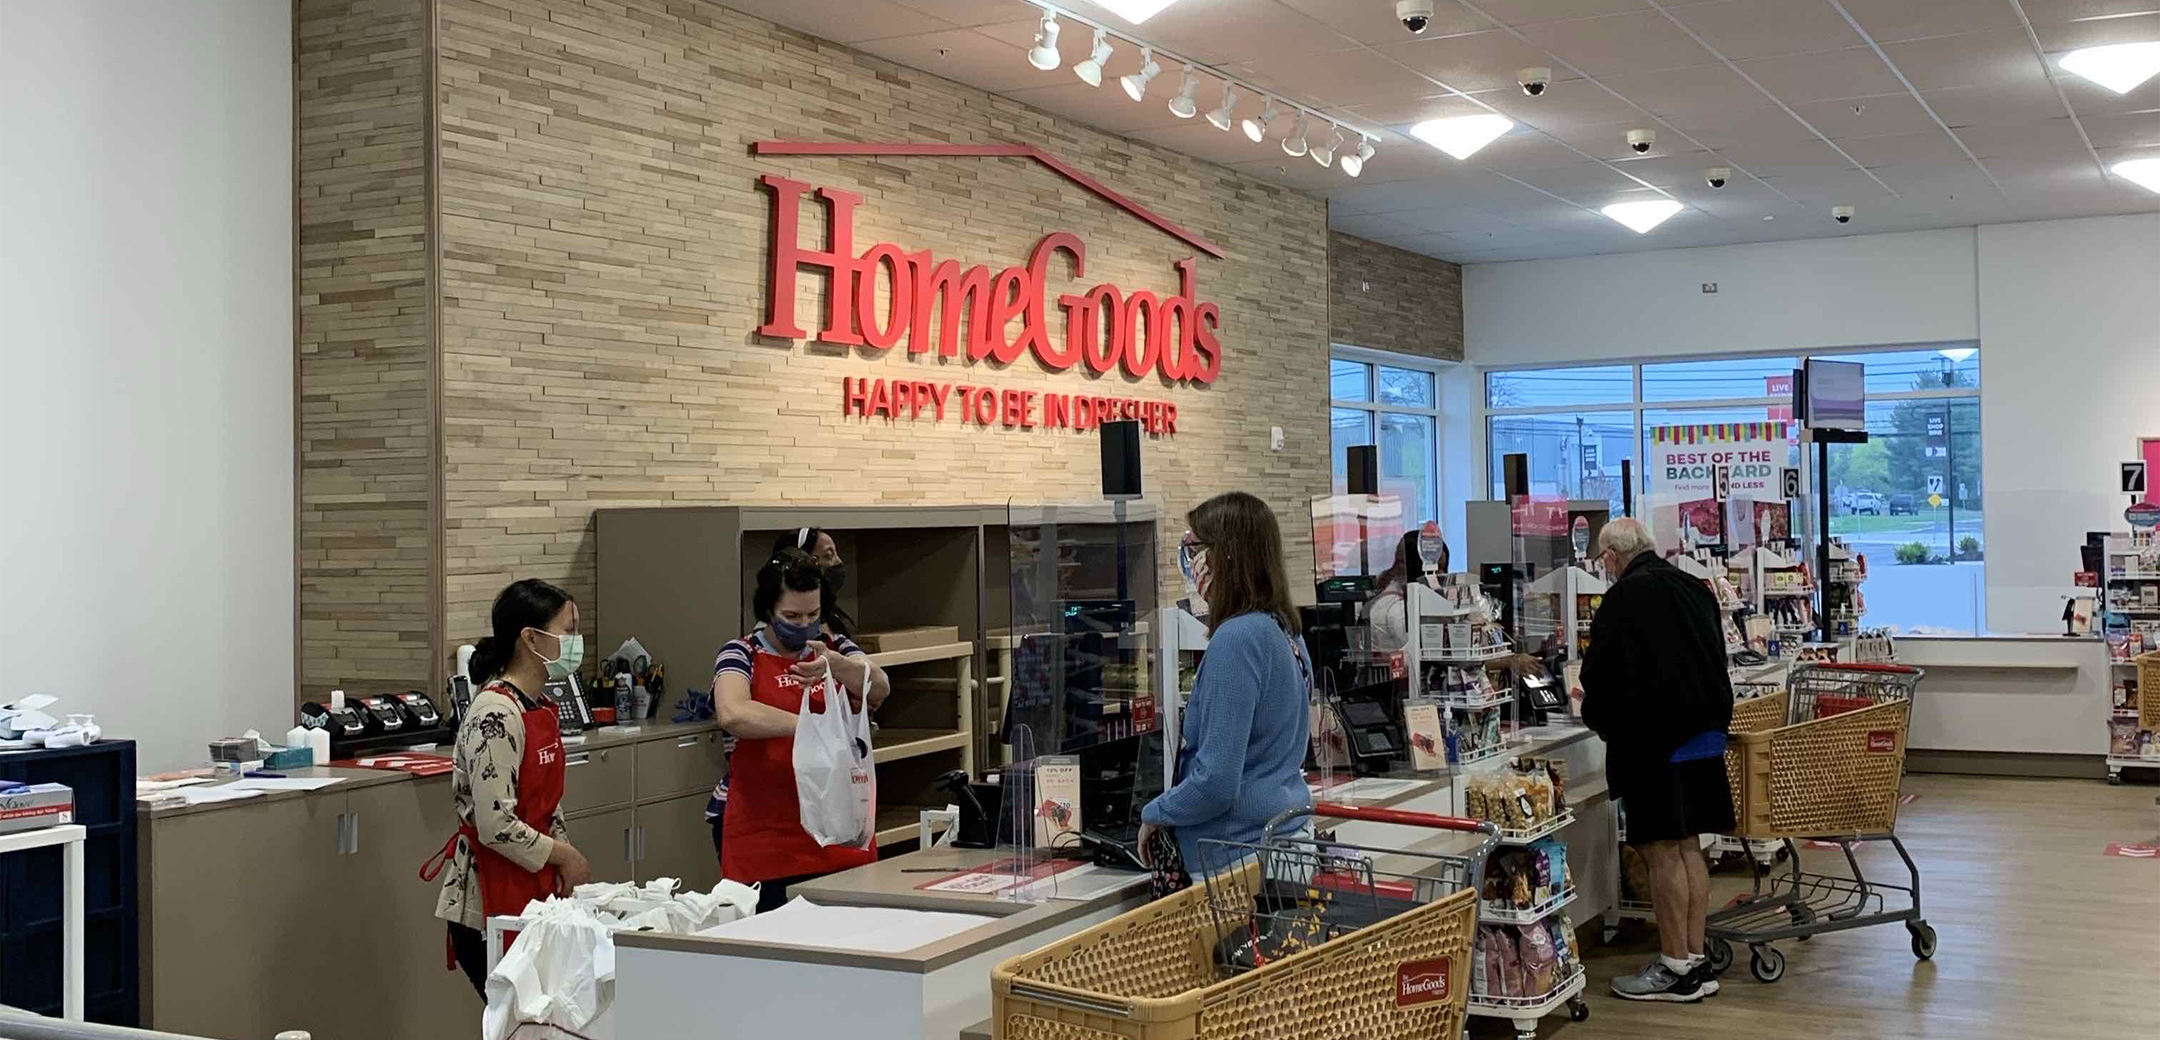 An interior view of the Homegoods checkout counter with a brick accent wall, high ceilings with cameras attached to it and cashiers, customers I the center.